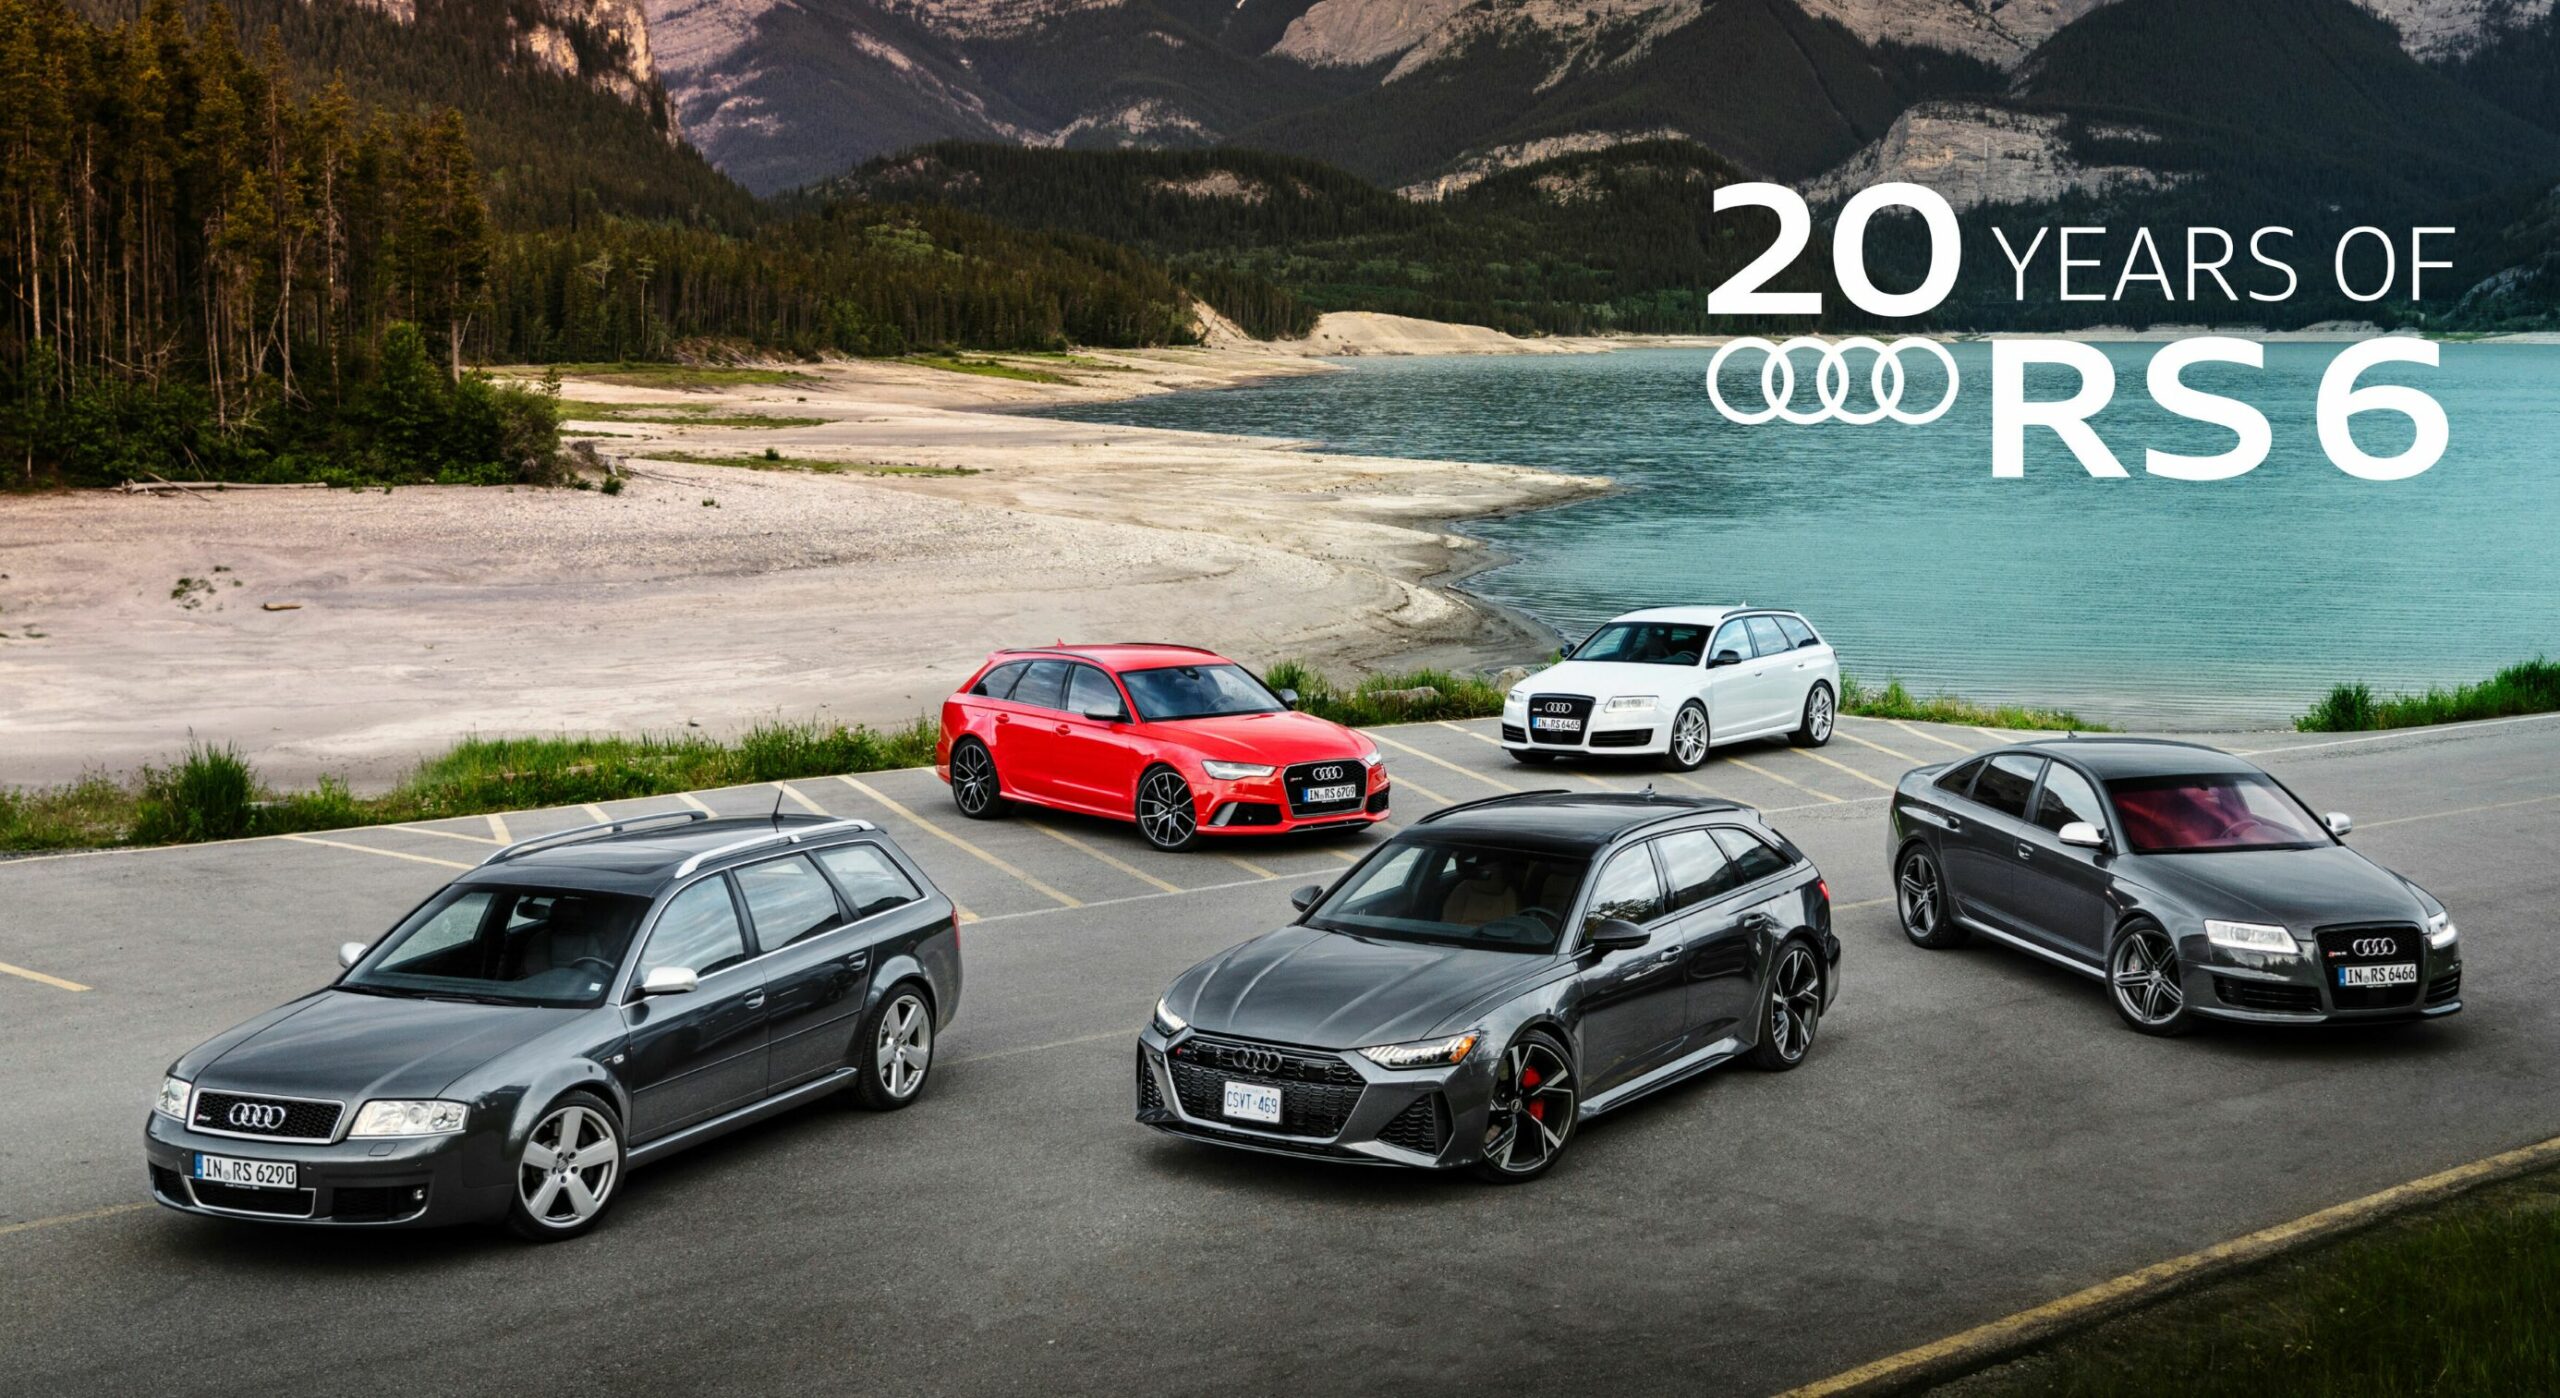 20 years of Audi RS6